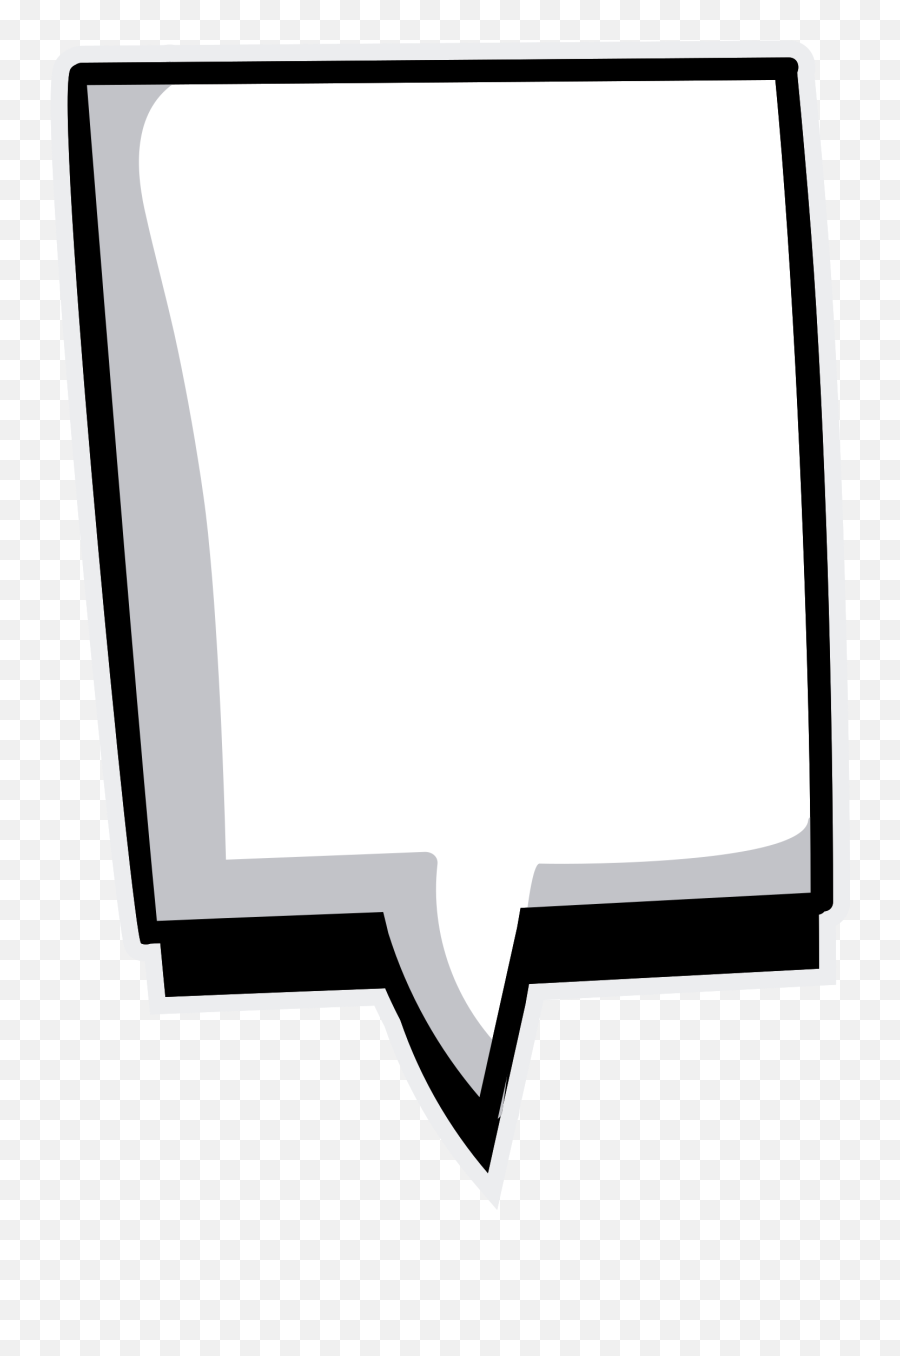 Free Speech Bubble Png With Transparent Background - Horizontal,White Speech Bubble Png